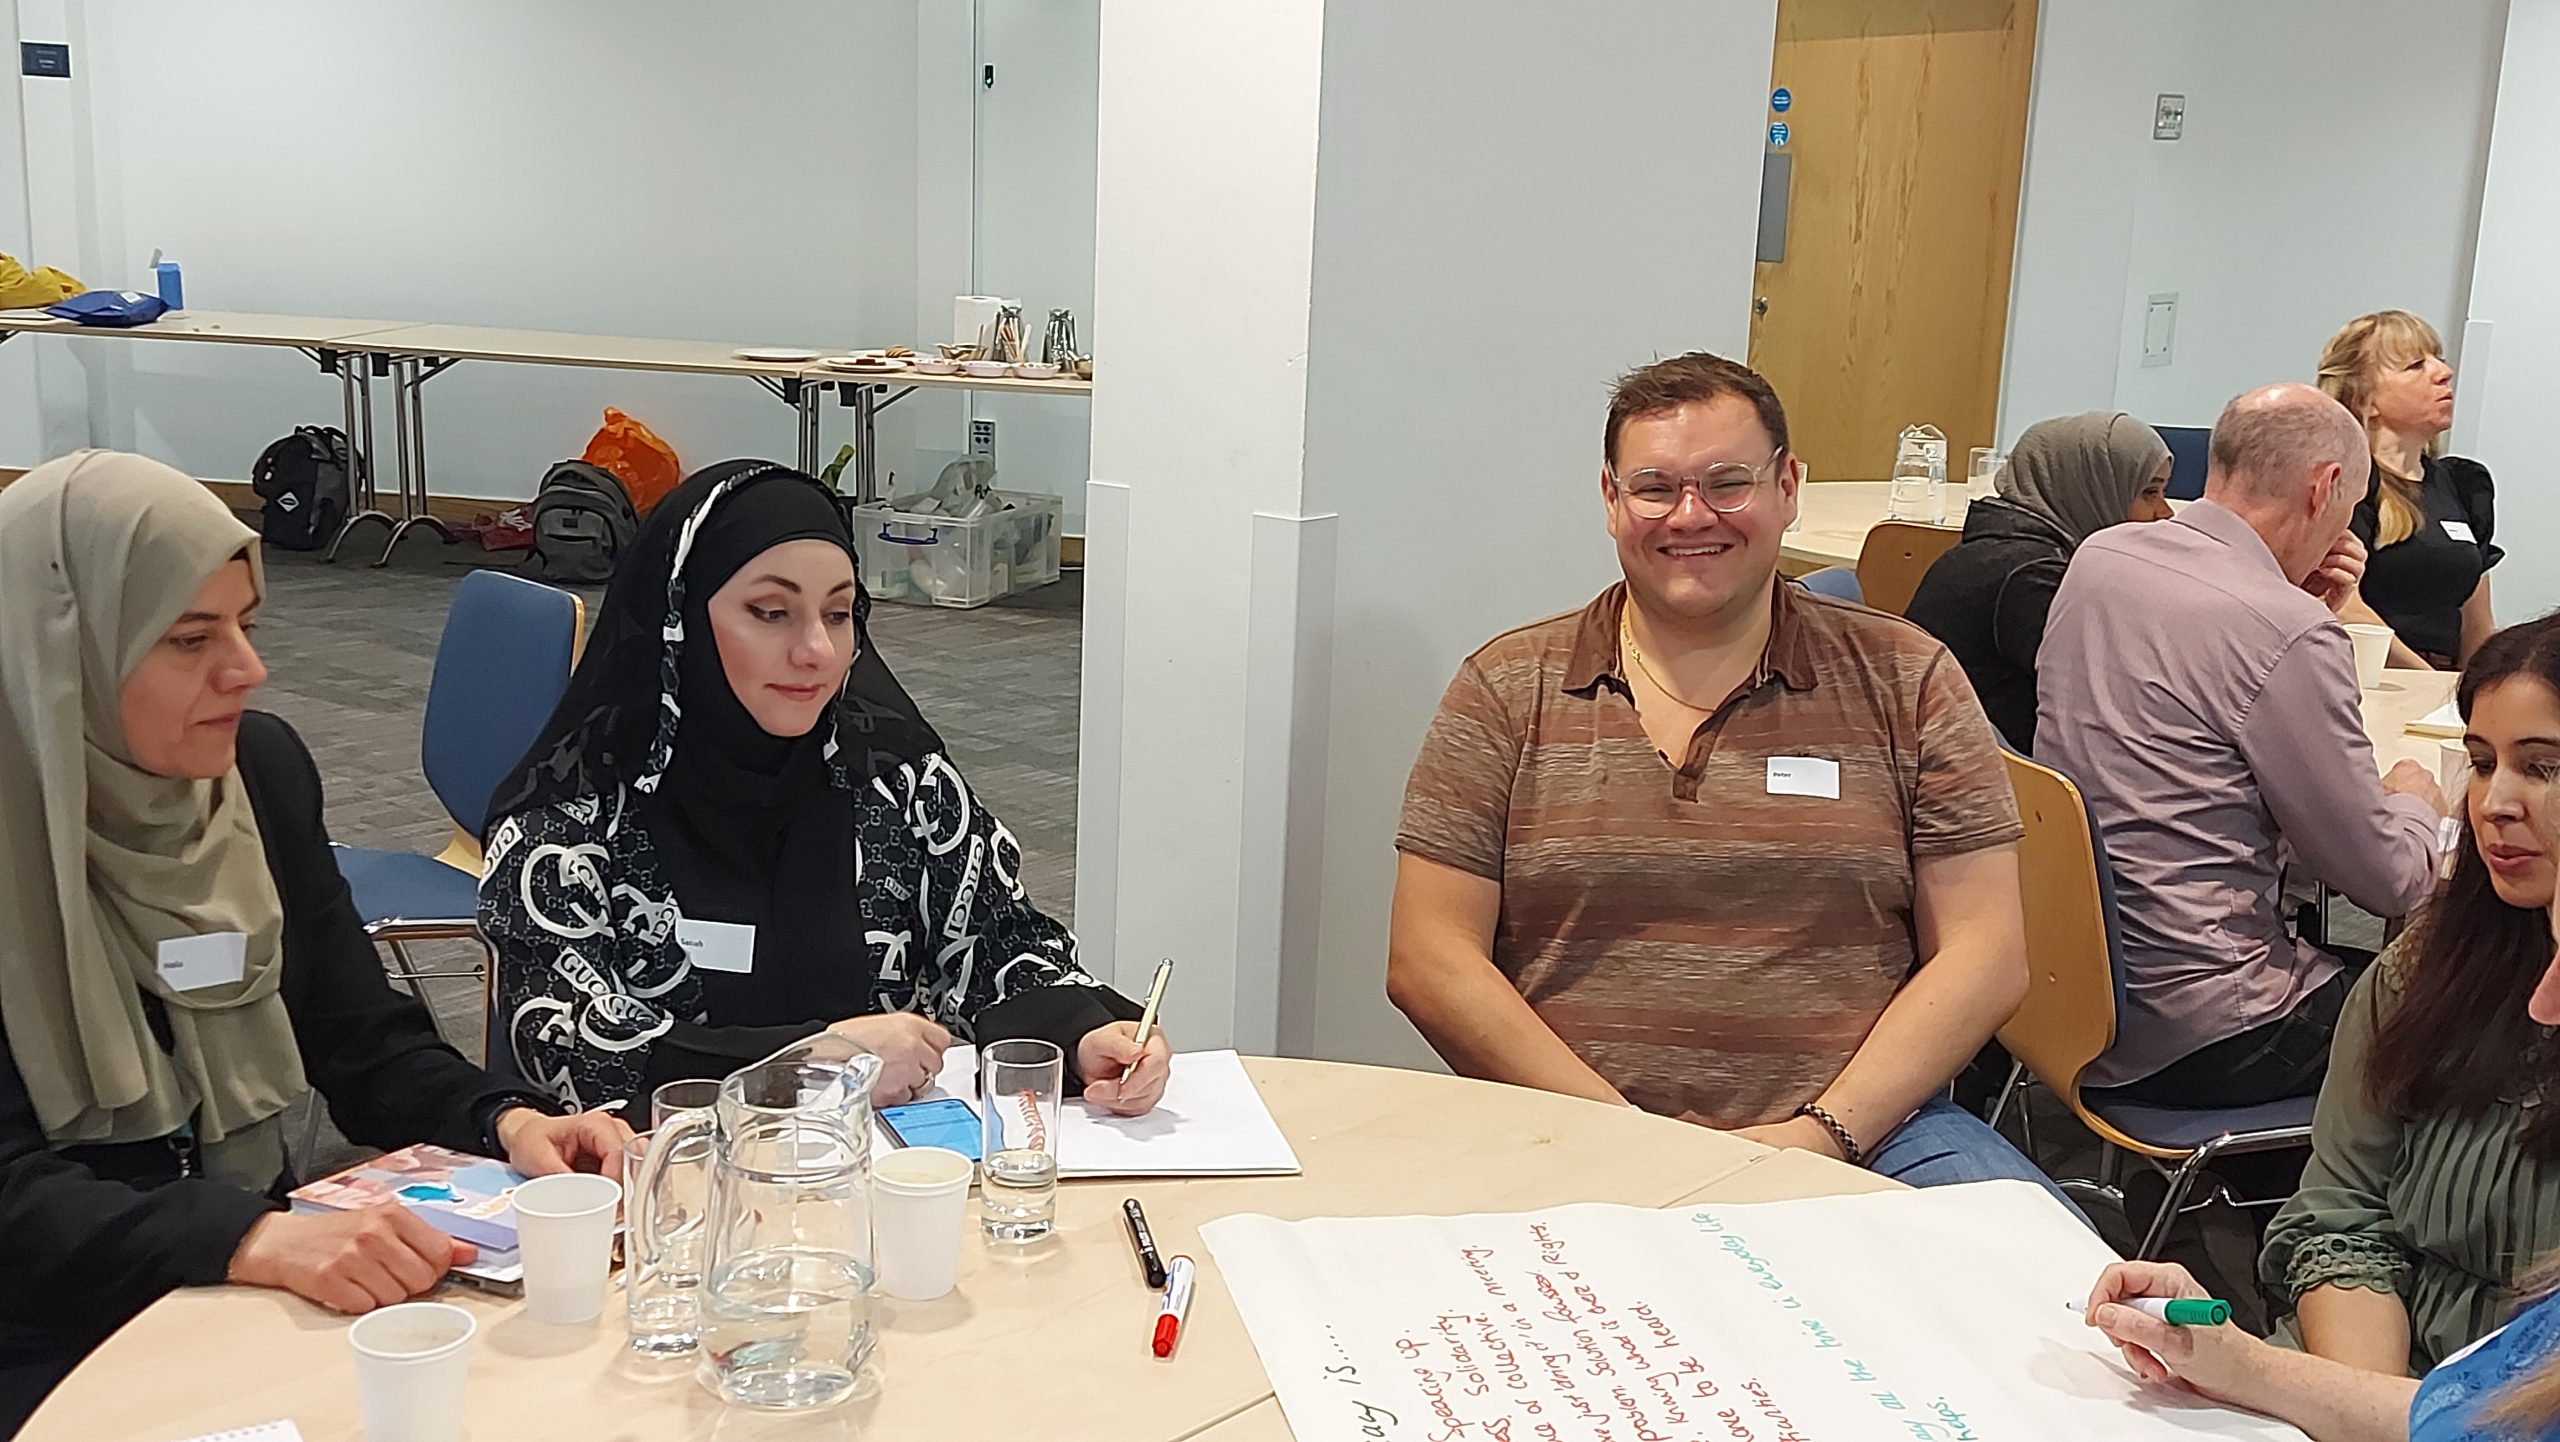 A photo from our Advocacy Together event. There are four people sat at a round table, which has some paper, pens and water glasses on top of it.